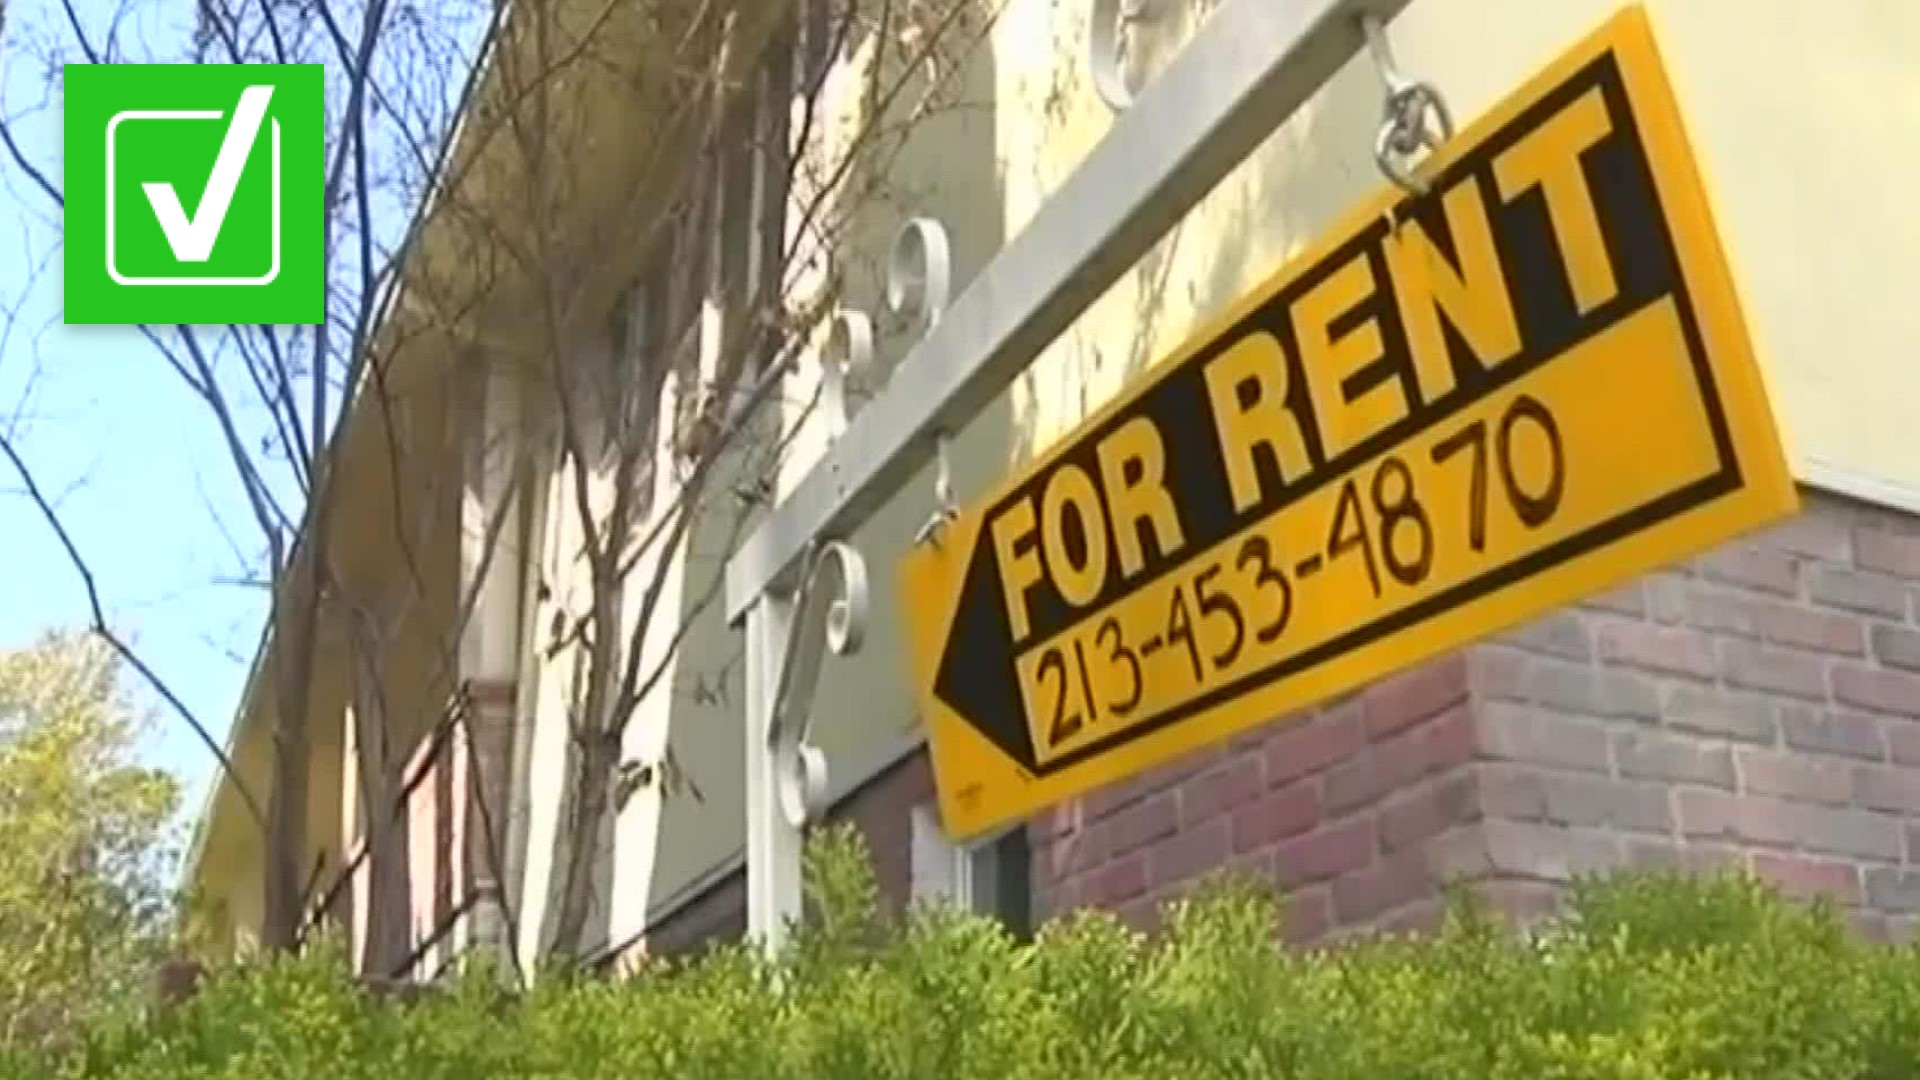 Over seven million people are not caught up on rent, according to new census bureau data. If you're one of them and live in Duval County, you can apply for help.